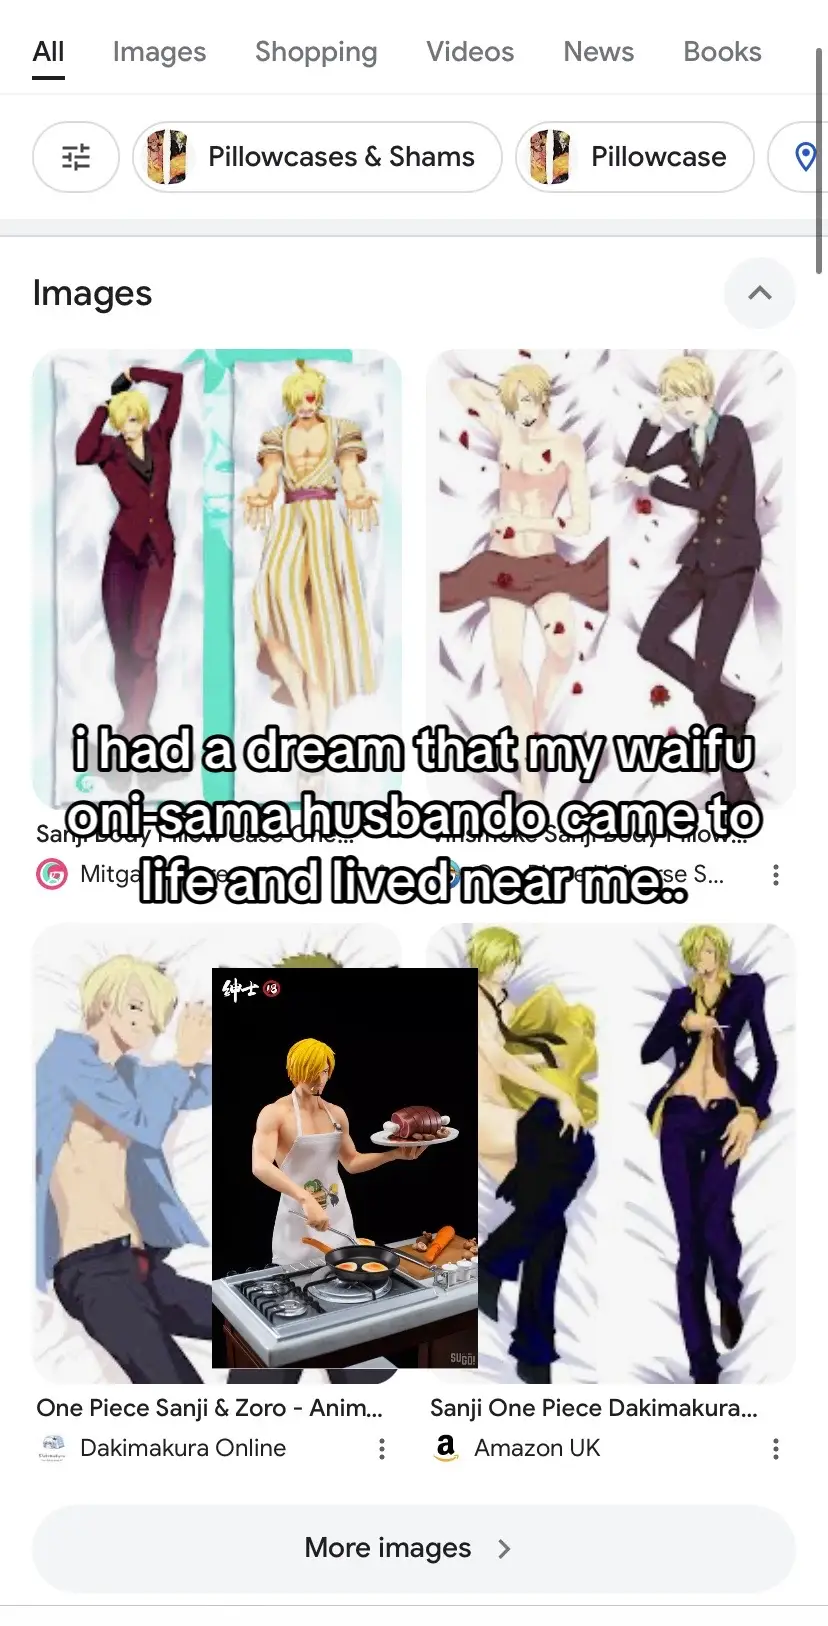 my ddreams are just drewms😔😔😢 #sanji #onepiece